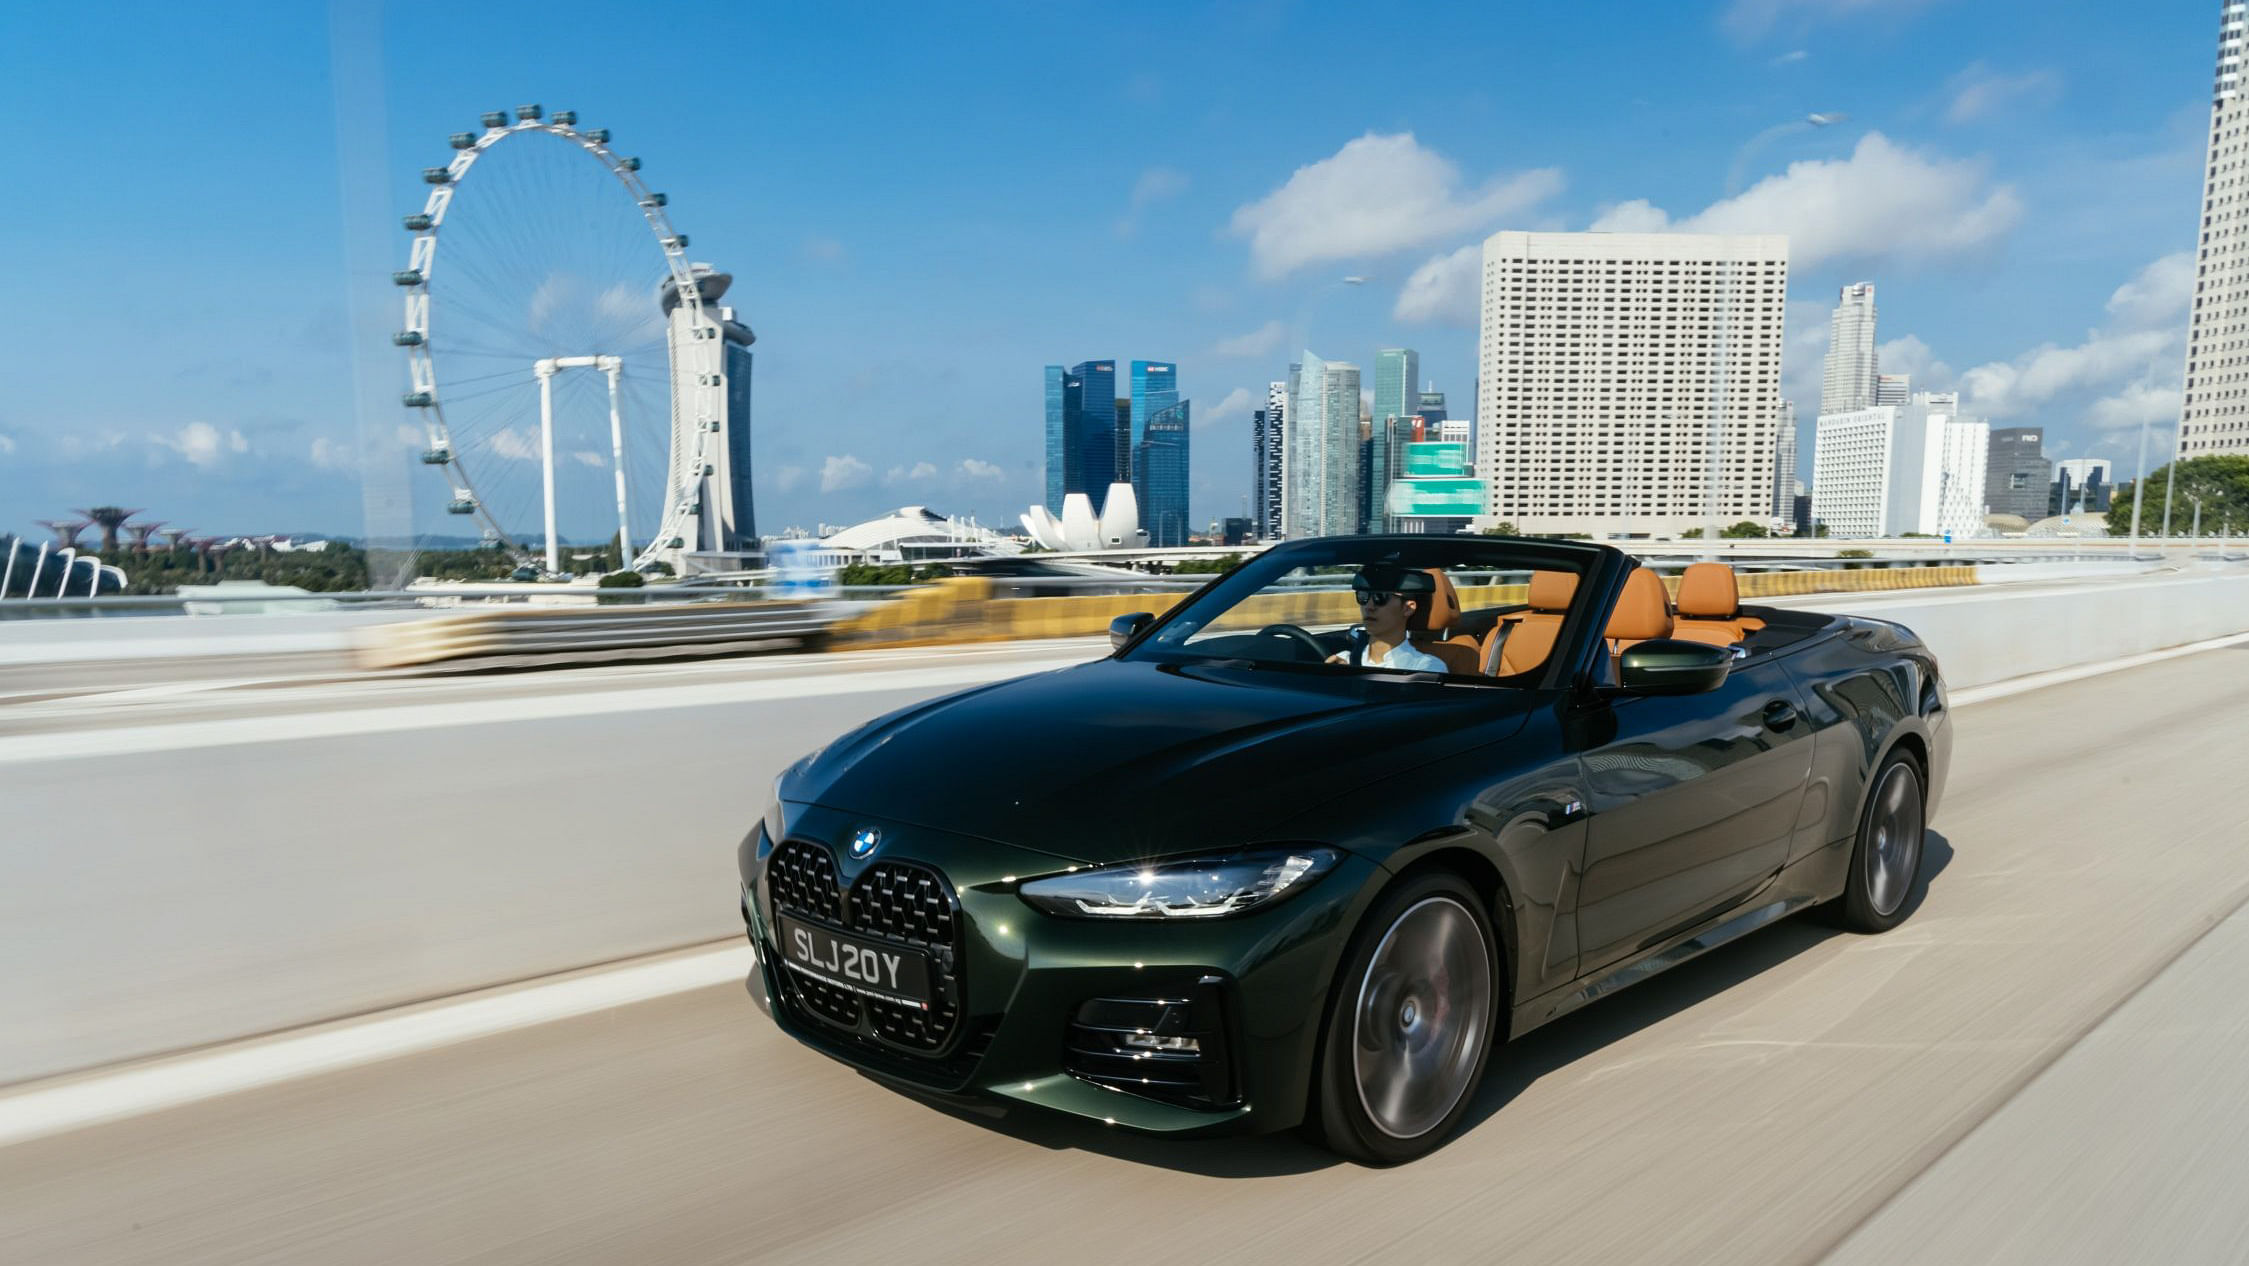 The BMW 4 Series Convertible being driven in Singapore.